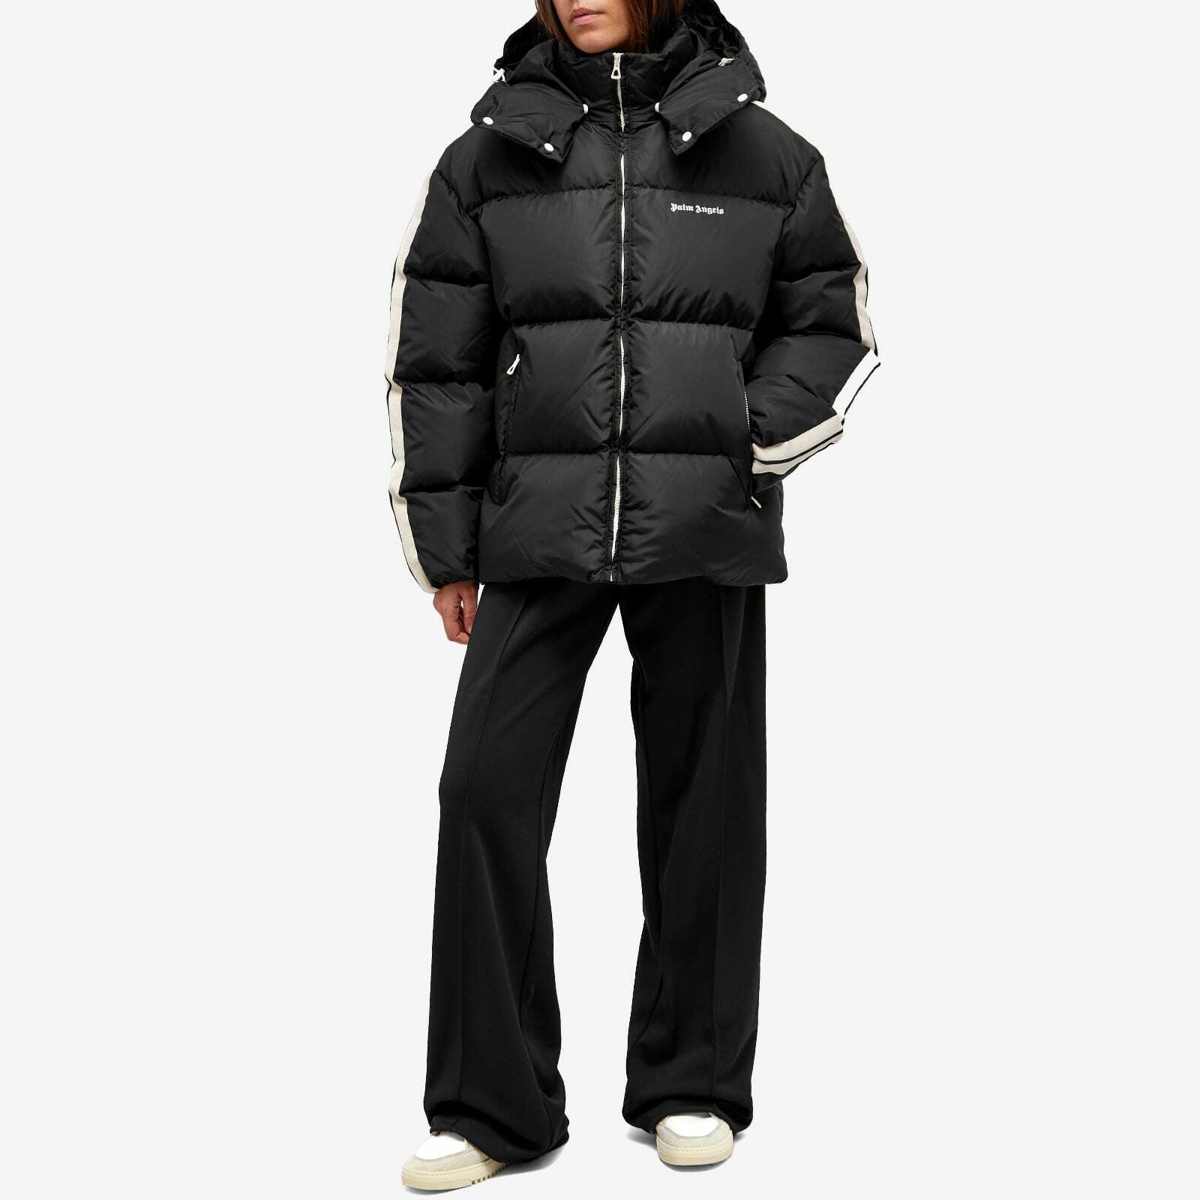 Palm Angels Women's Hooded Track Down Jacket in Black